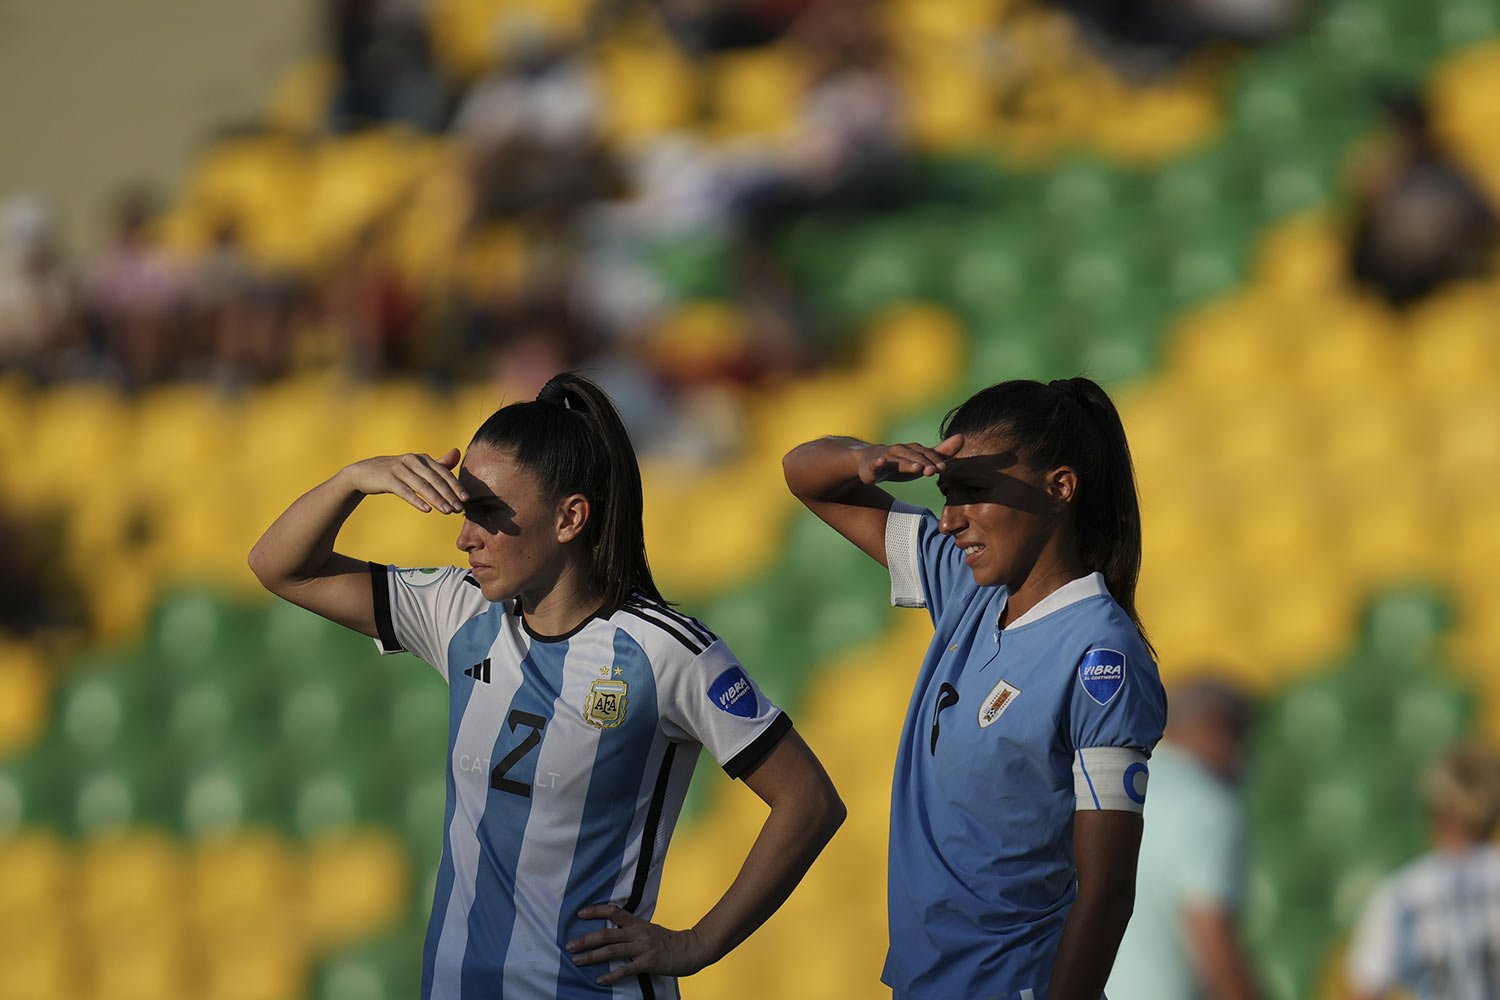  Argentina's Agustina Barroso, left, and Uruguay's Pamela Gonzalez stand on the field during a Women's Copa America soccer match in Armenia, Colombia , Friday, July 15, 2022. (AP Photo/Dolores Ochoa) 